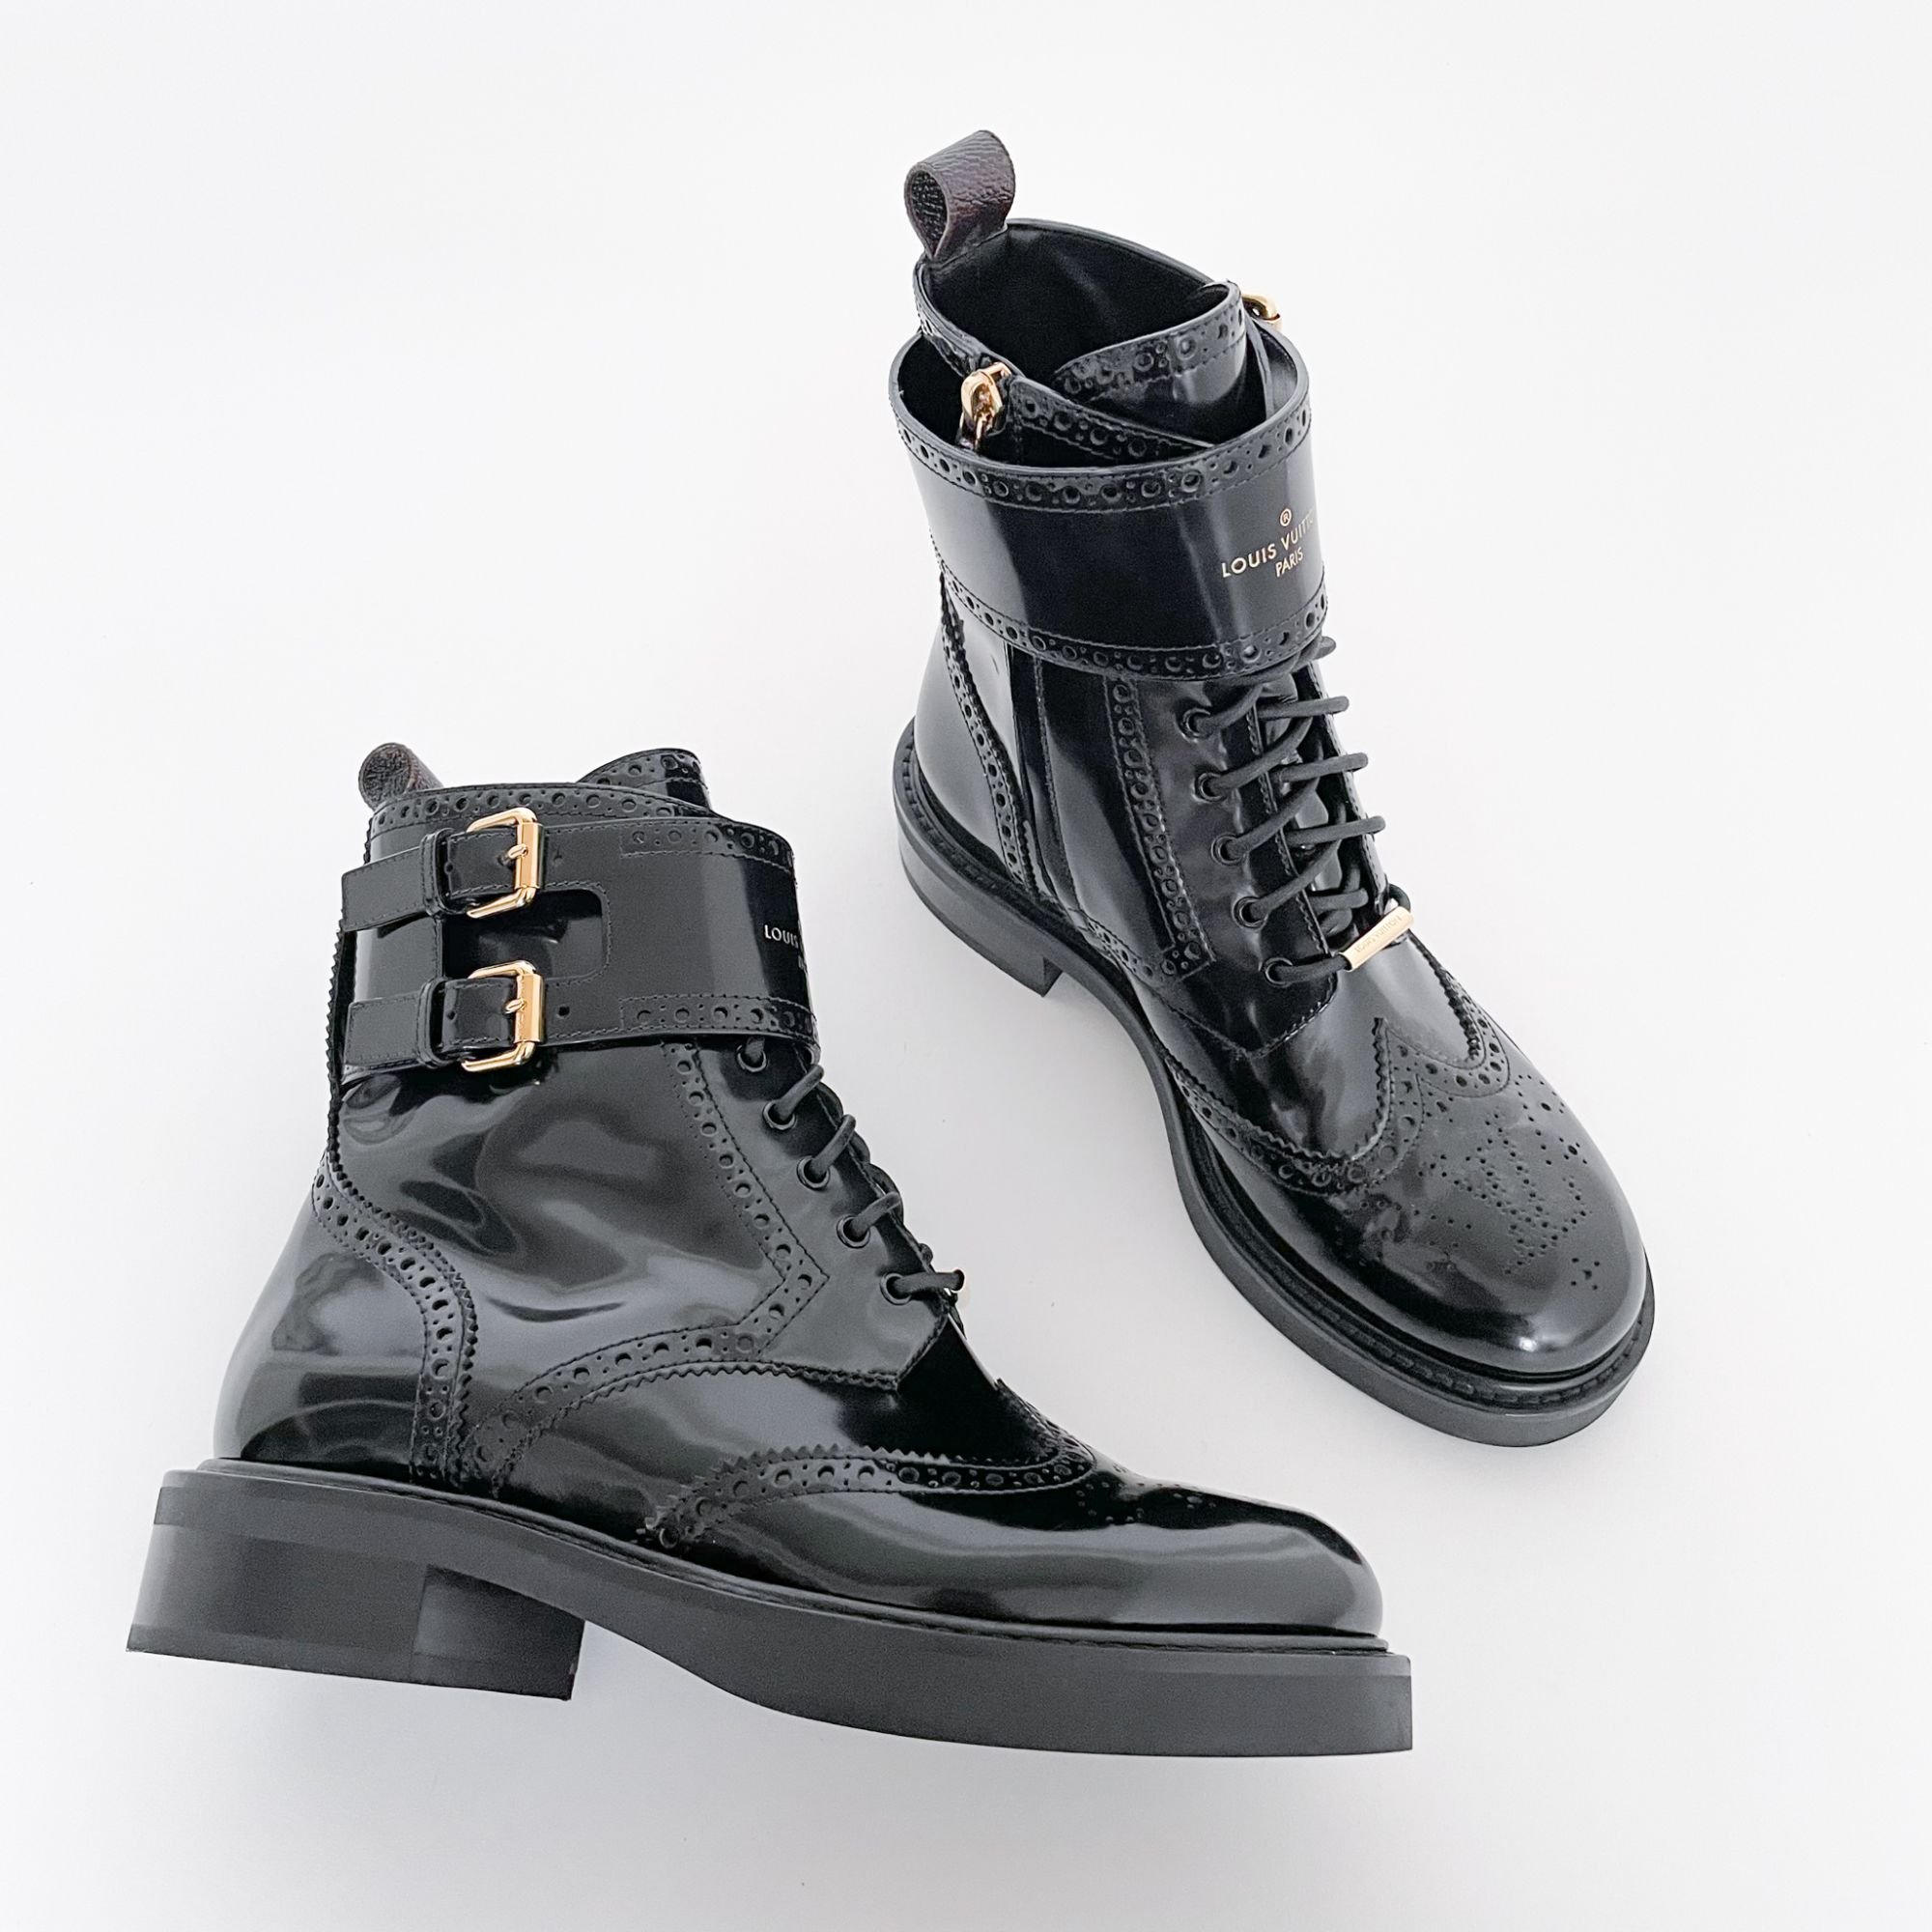 Shop authentic Louis Vuitton Star Trail Monogram Ankle Boots at revogue for  just USD 120000